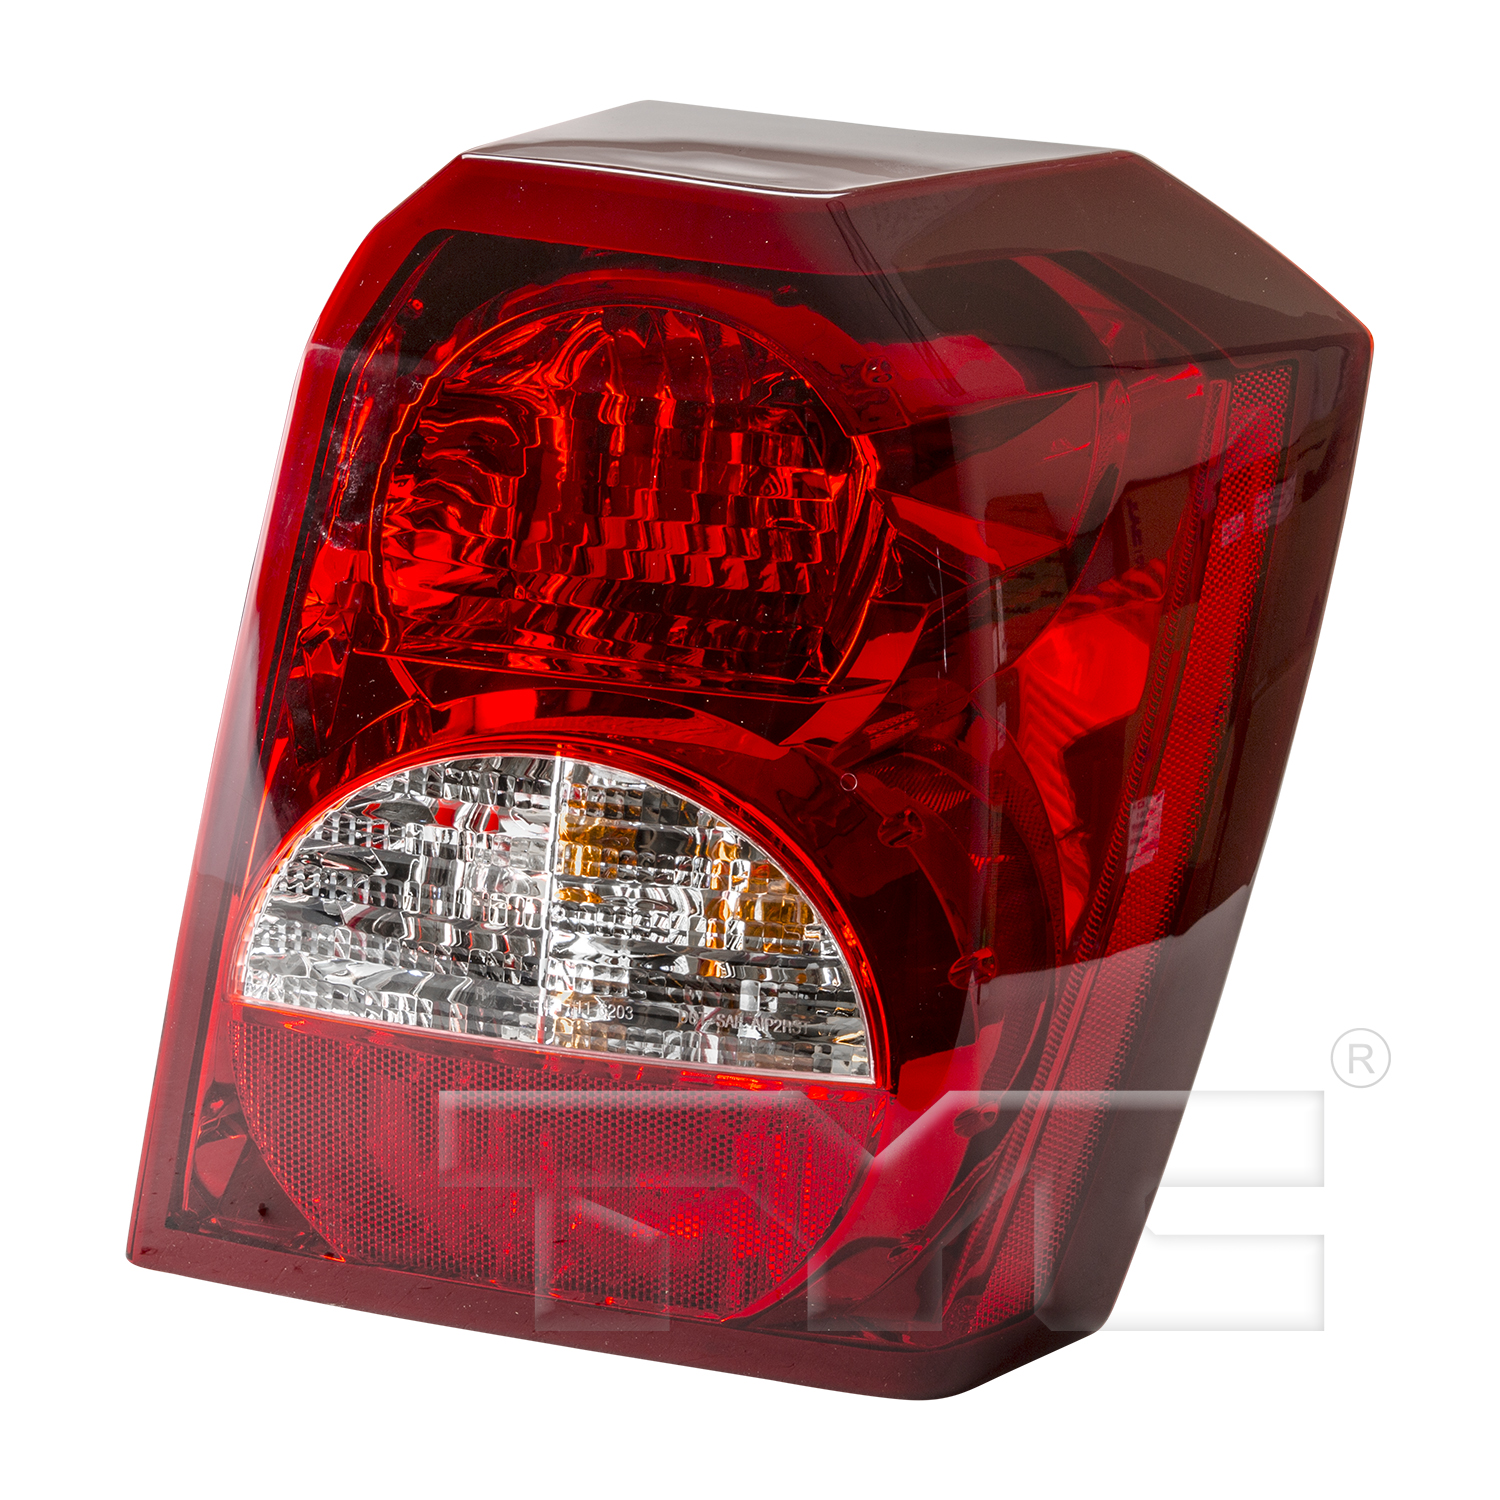 Aftermarket TAILLIGHTS for DODGE - CALIBER, CALIBER,07-07,RT Taillamp lens/housing